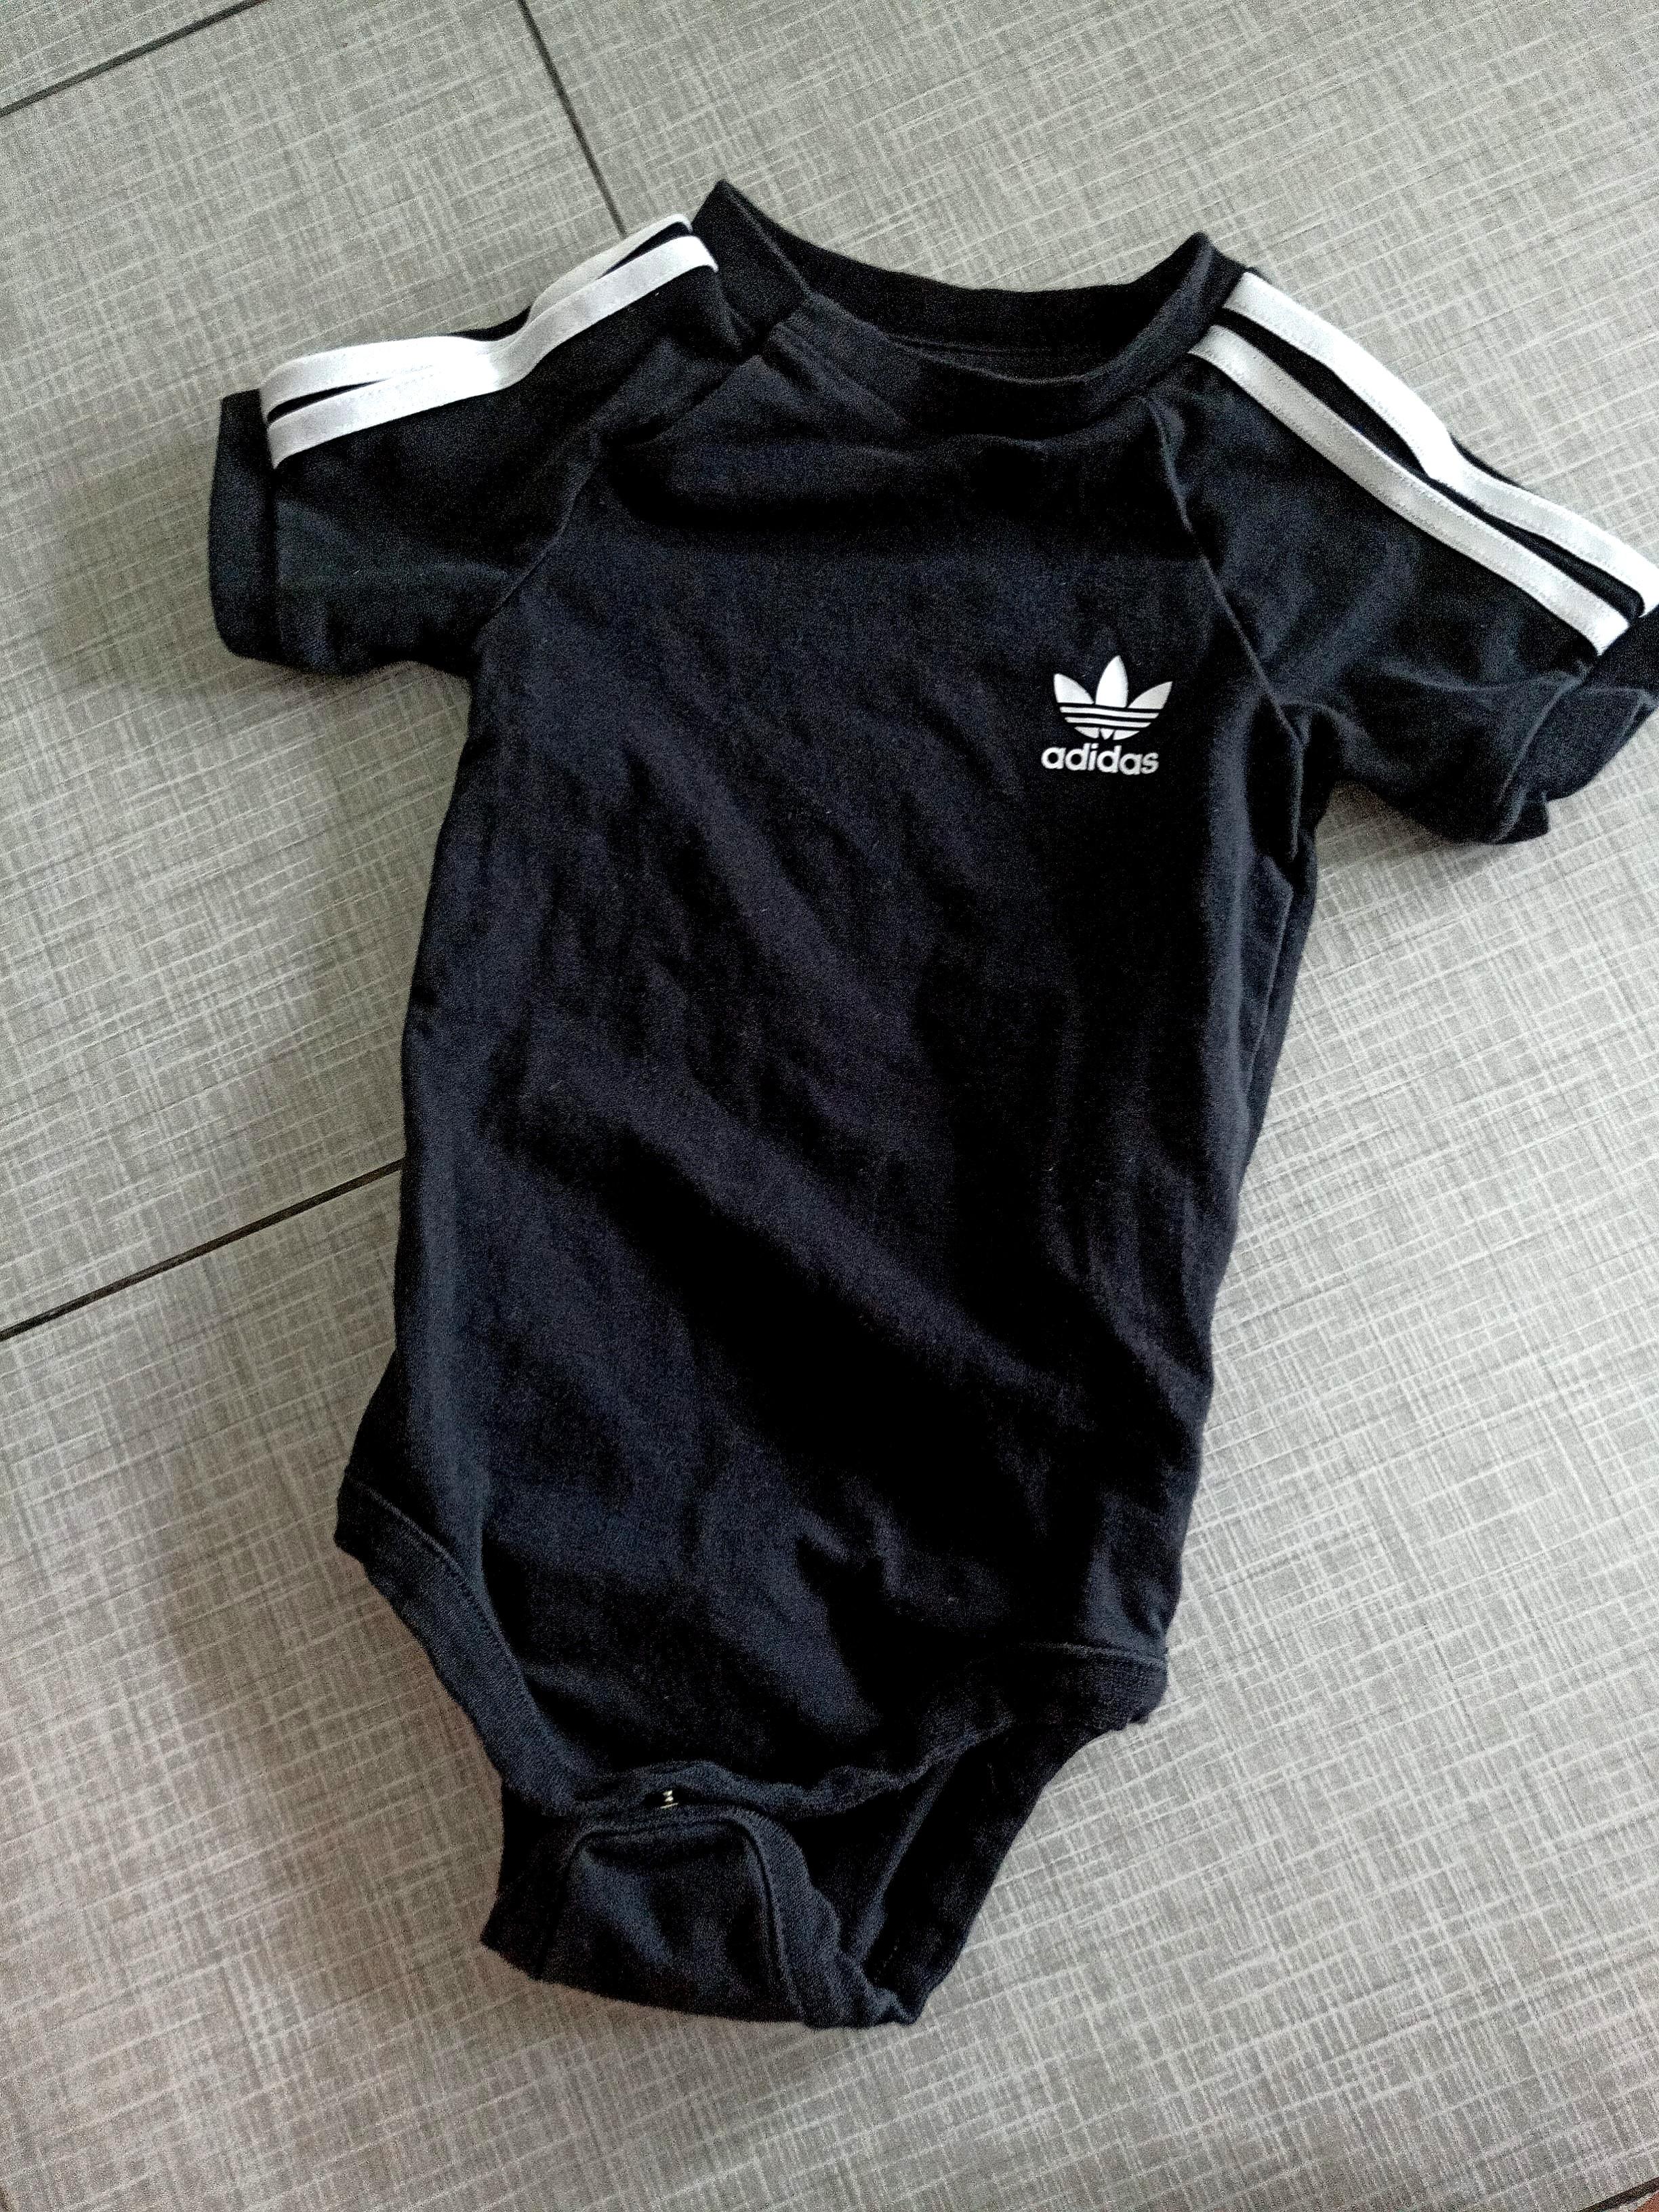 adidas suit baby